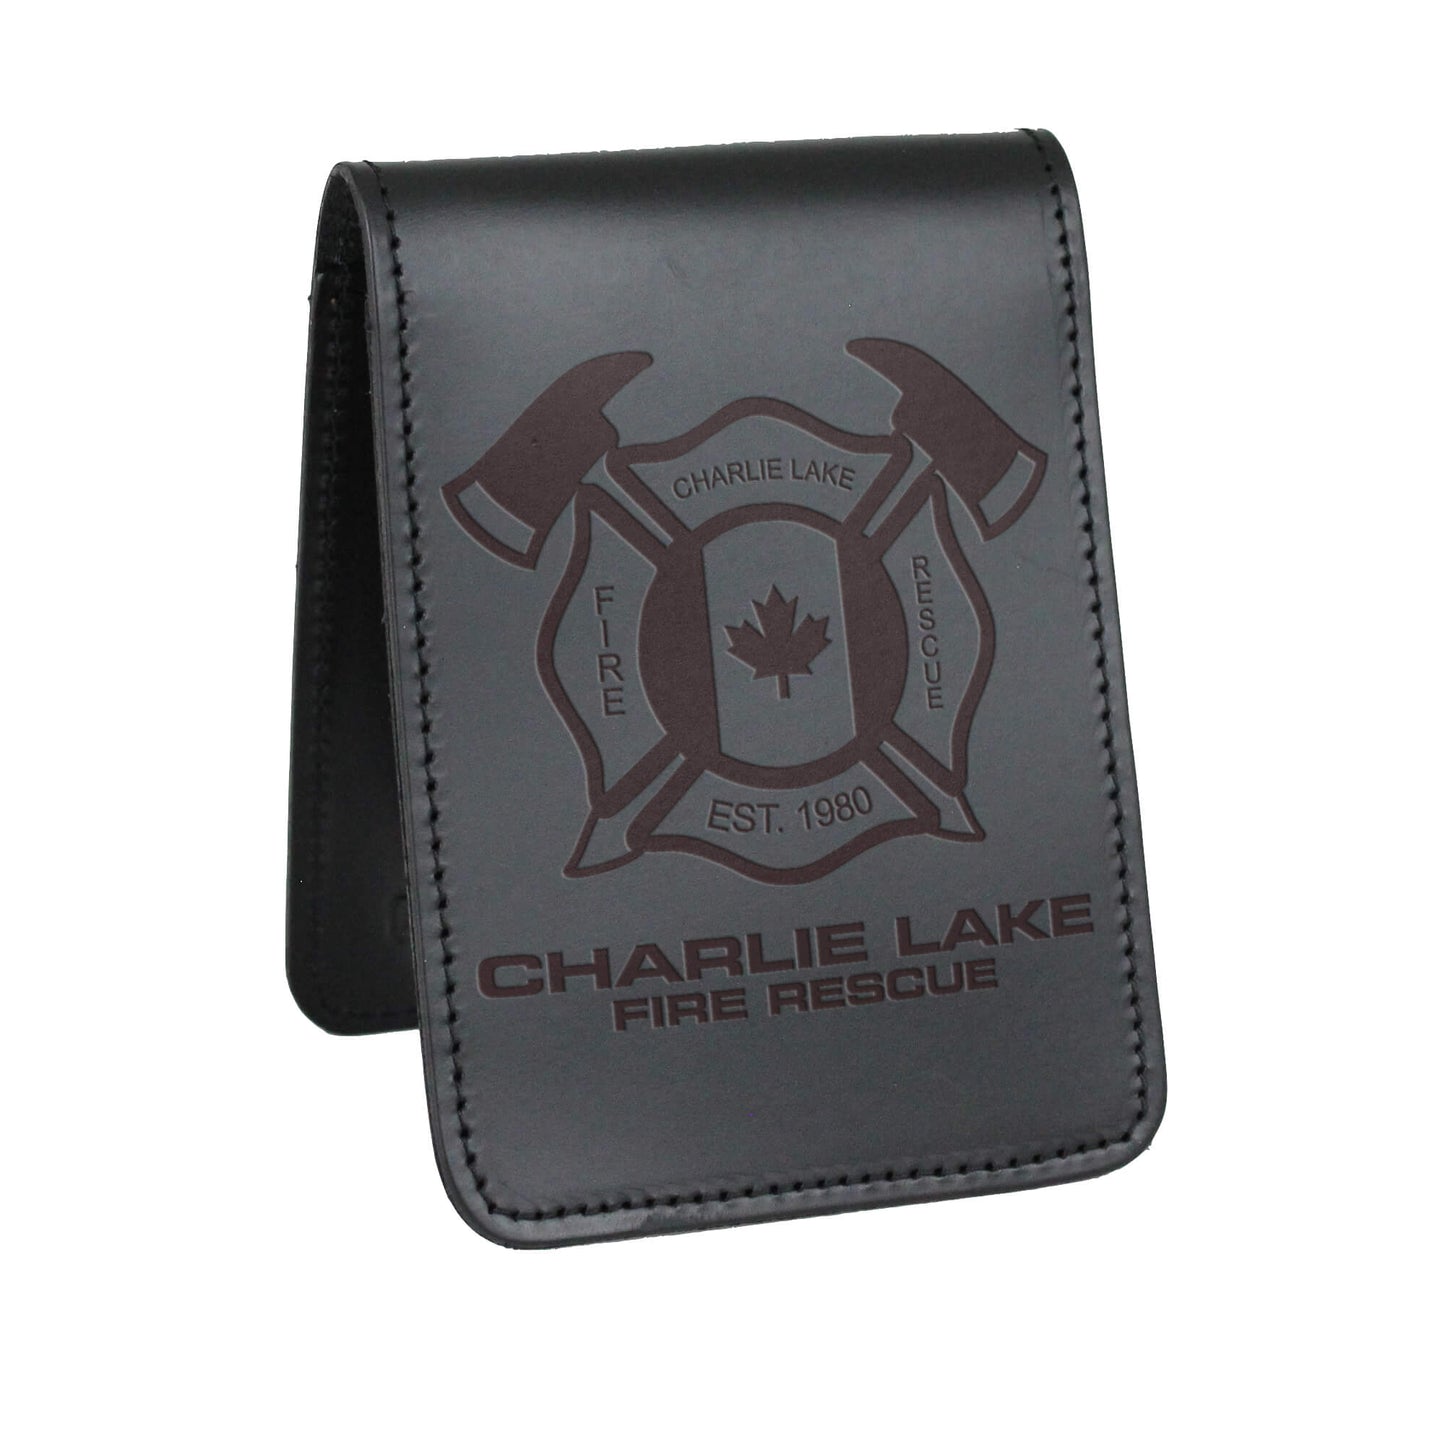 Charlie Lake Fire Rescue Notebook Cover